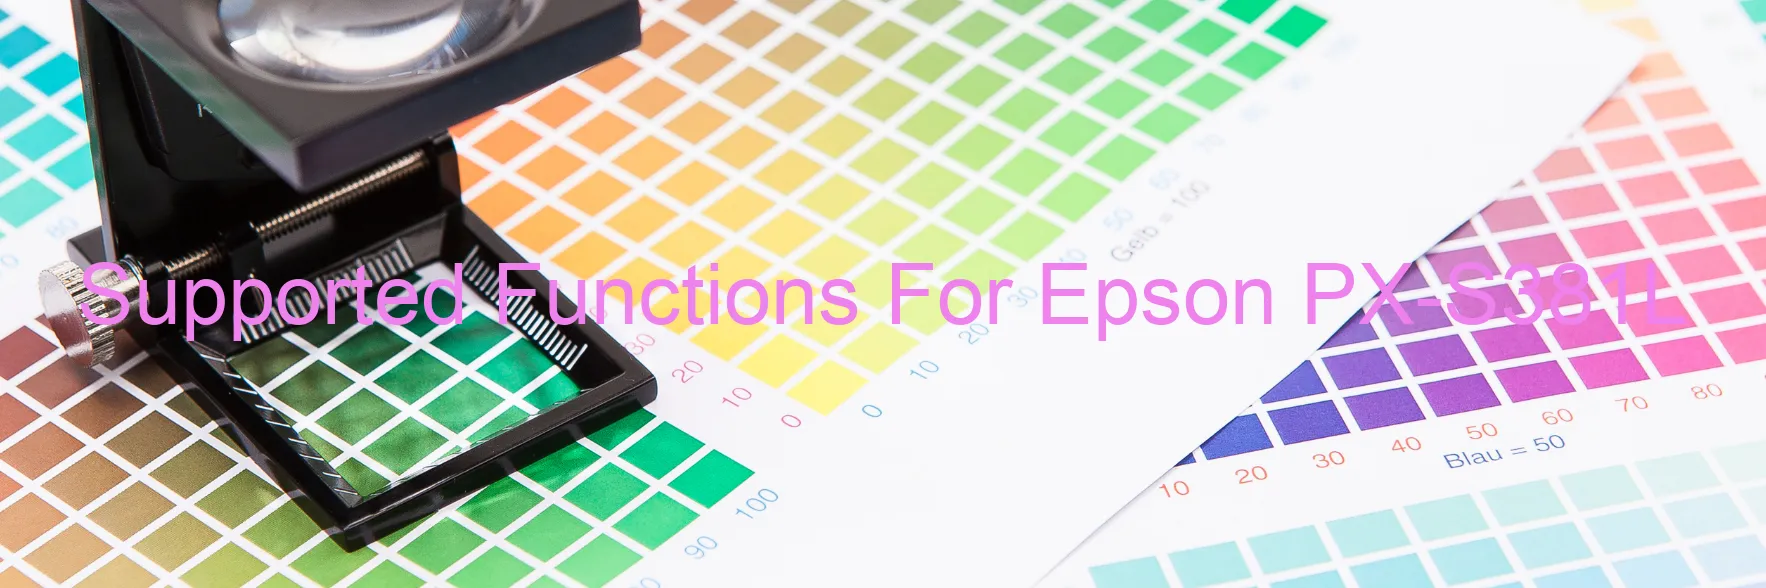 supported-functions-for-epson-px-s381l.webp